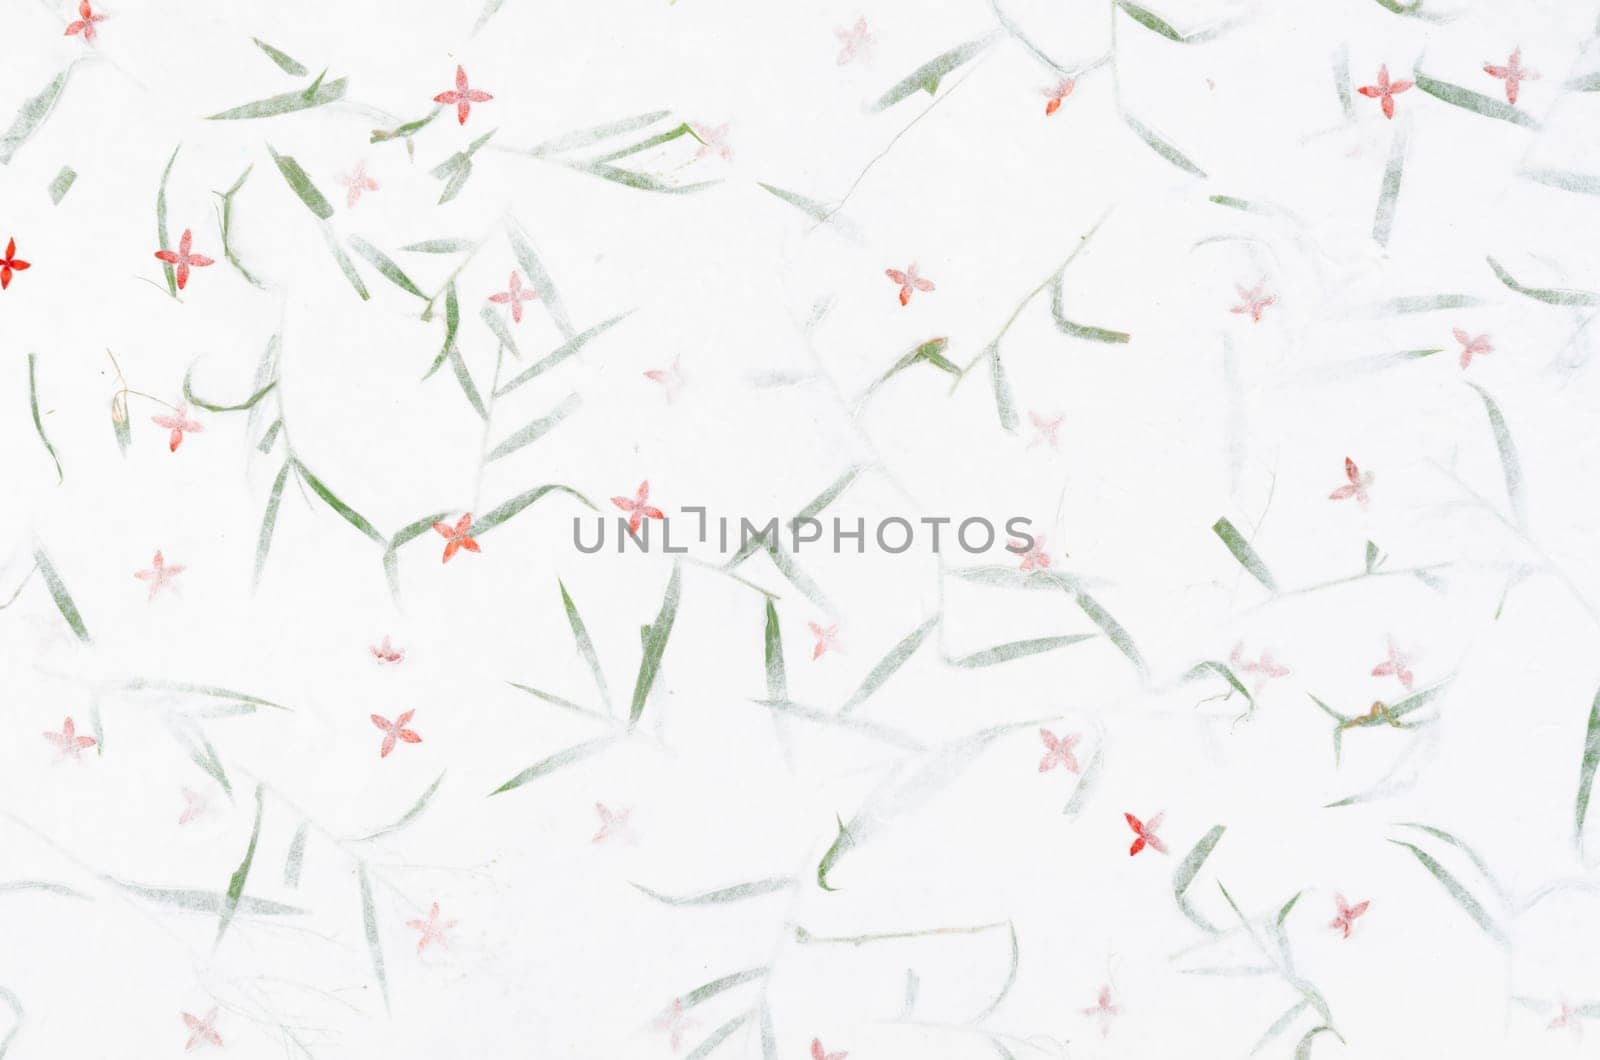 The Mulberry paper texture background by Gamjai